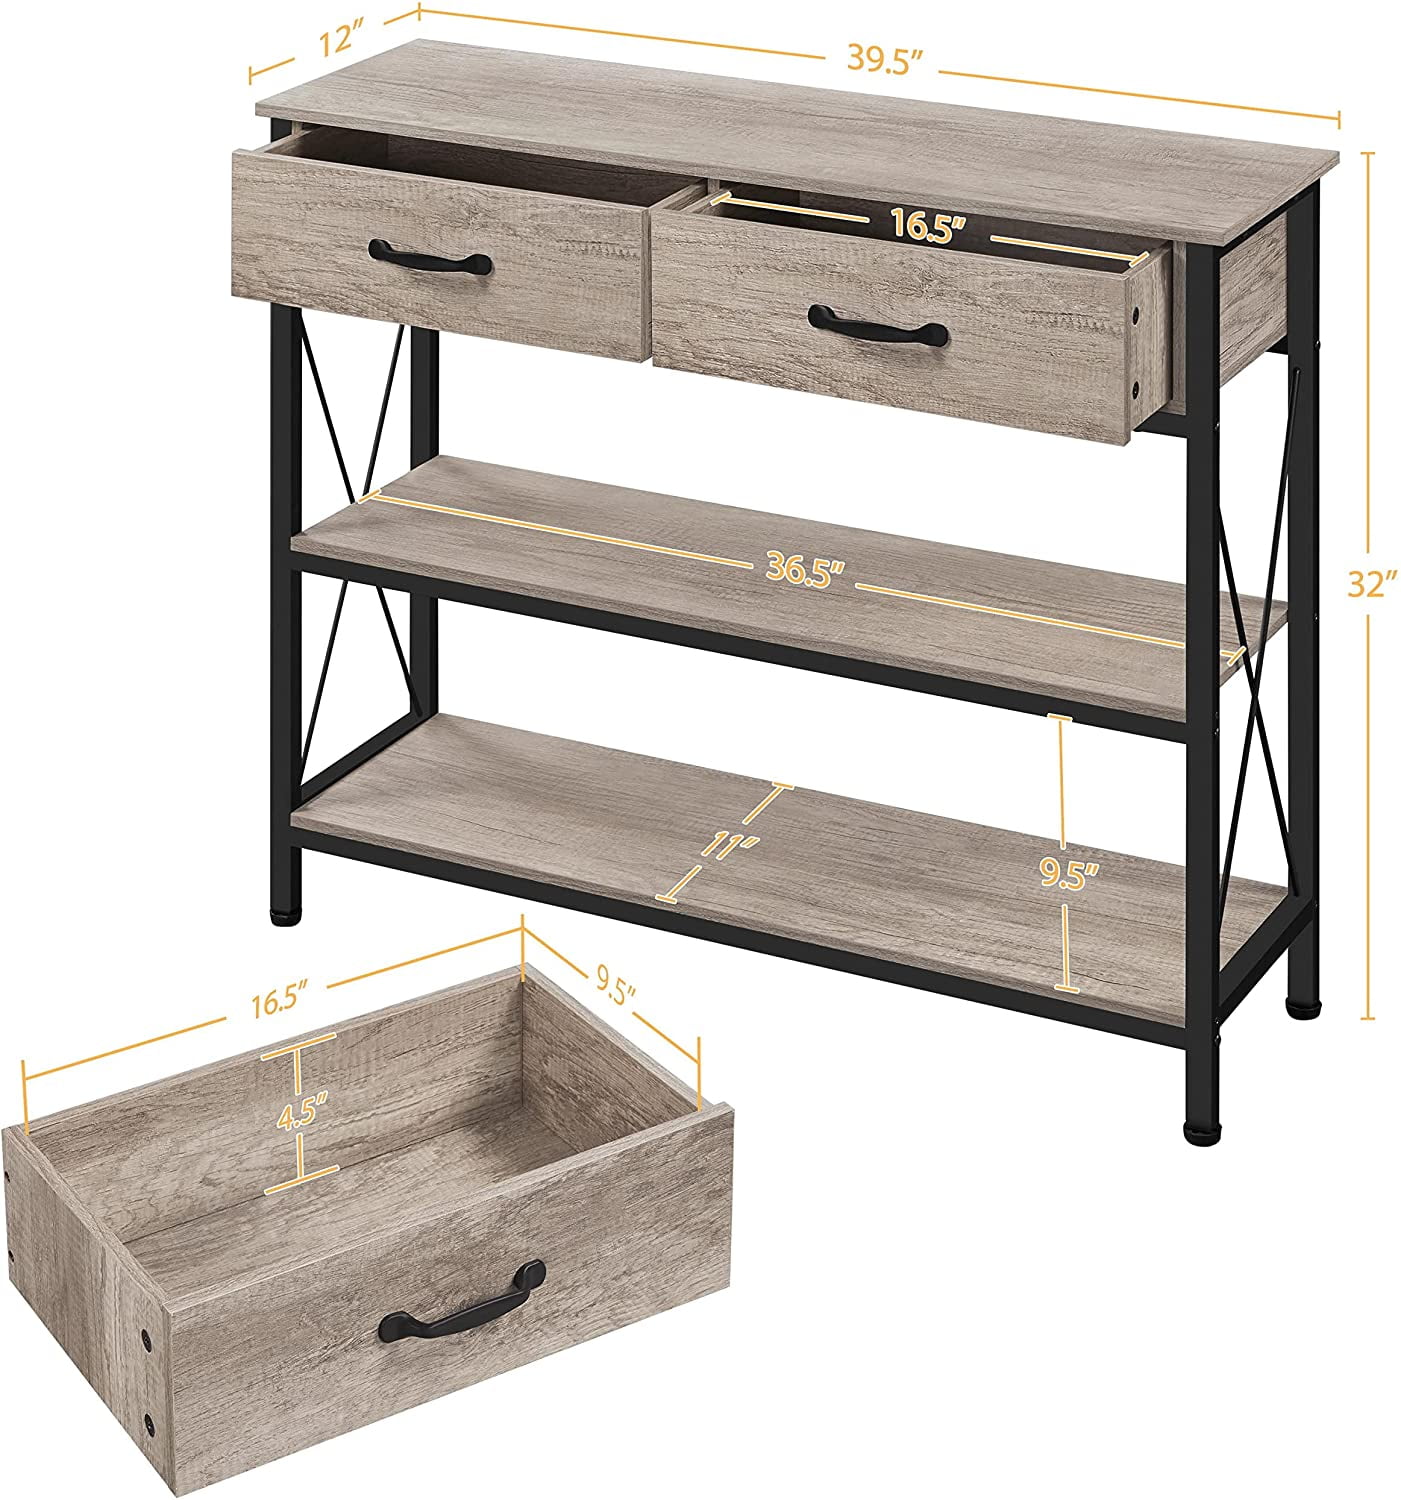 Console Table with 2 Drawers, Industrial 3 Tier Entryway Sofa Table ...